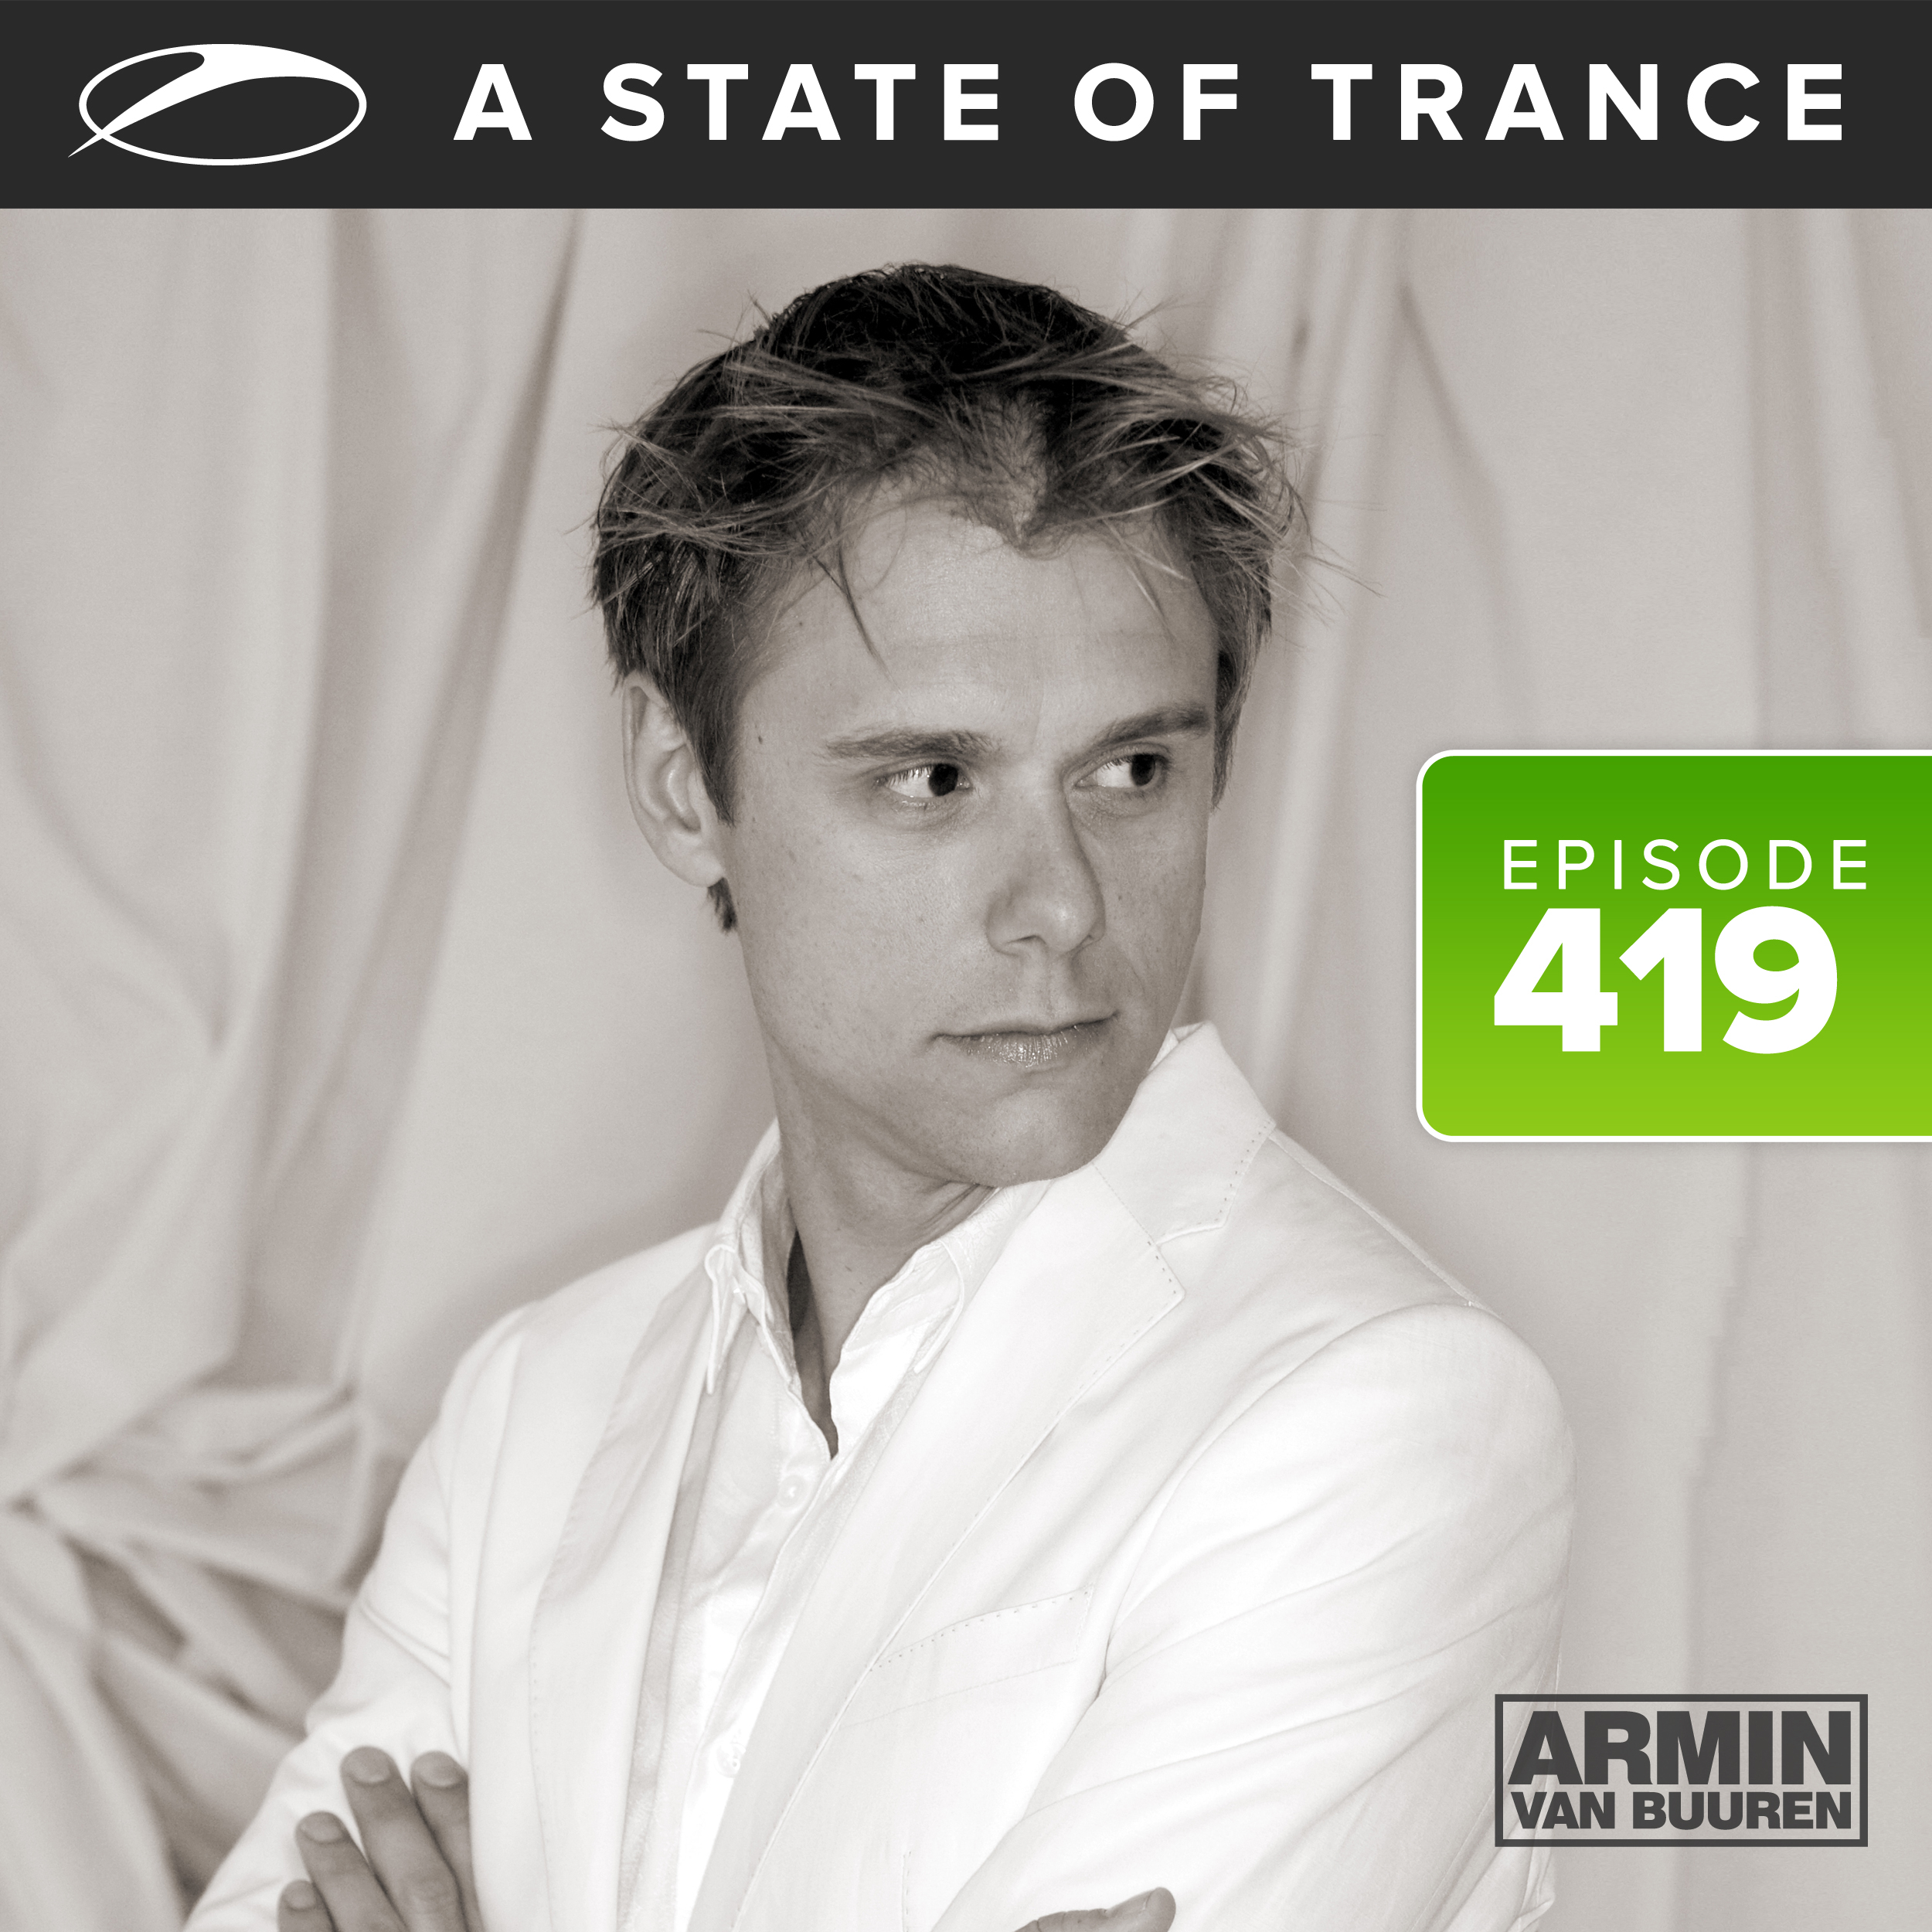 A State Of Trance Episode 419